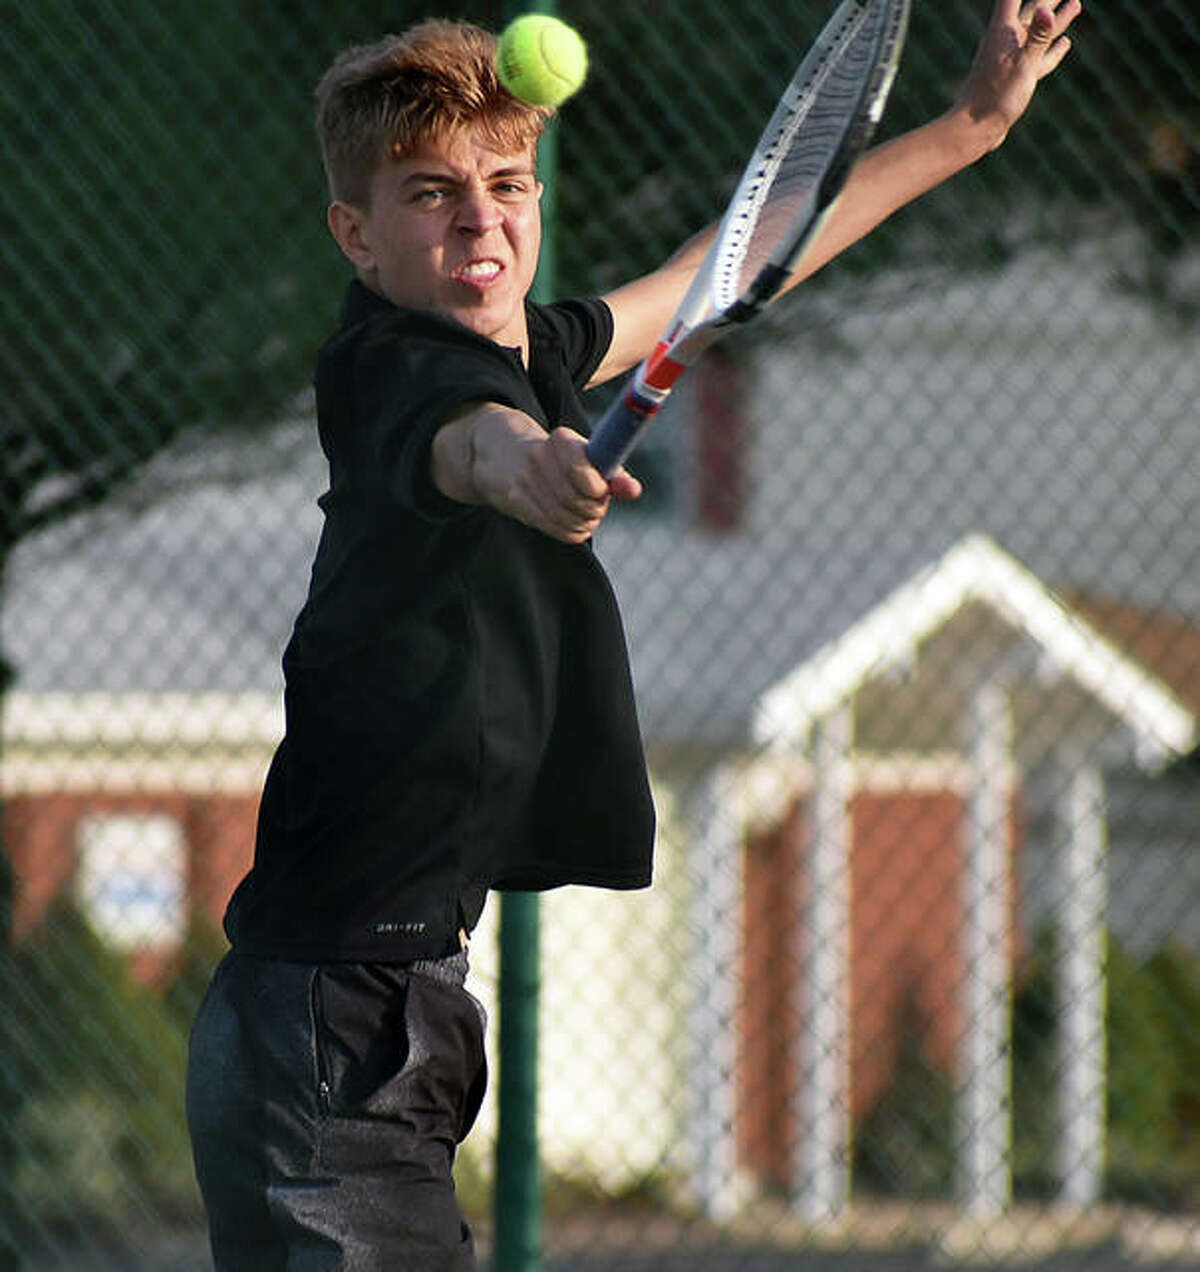 Edwardsville’s Ben Blake hits a backhand shot near the net during doubles action against the O’Fallon Panthers in O’Fallon.